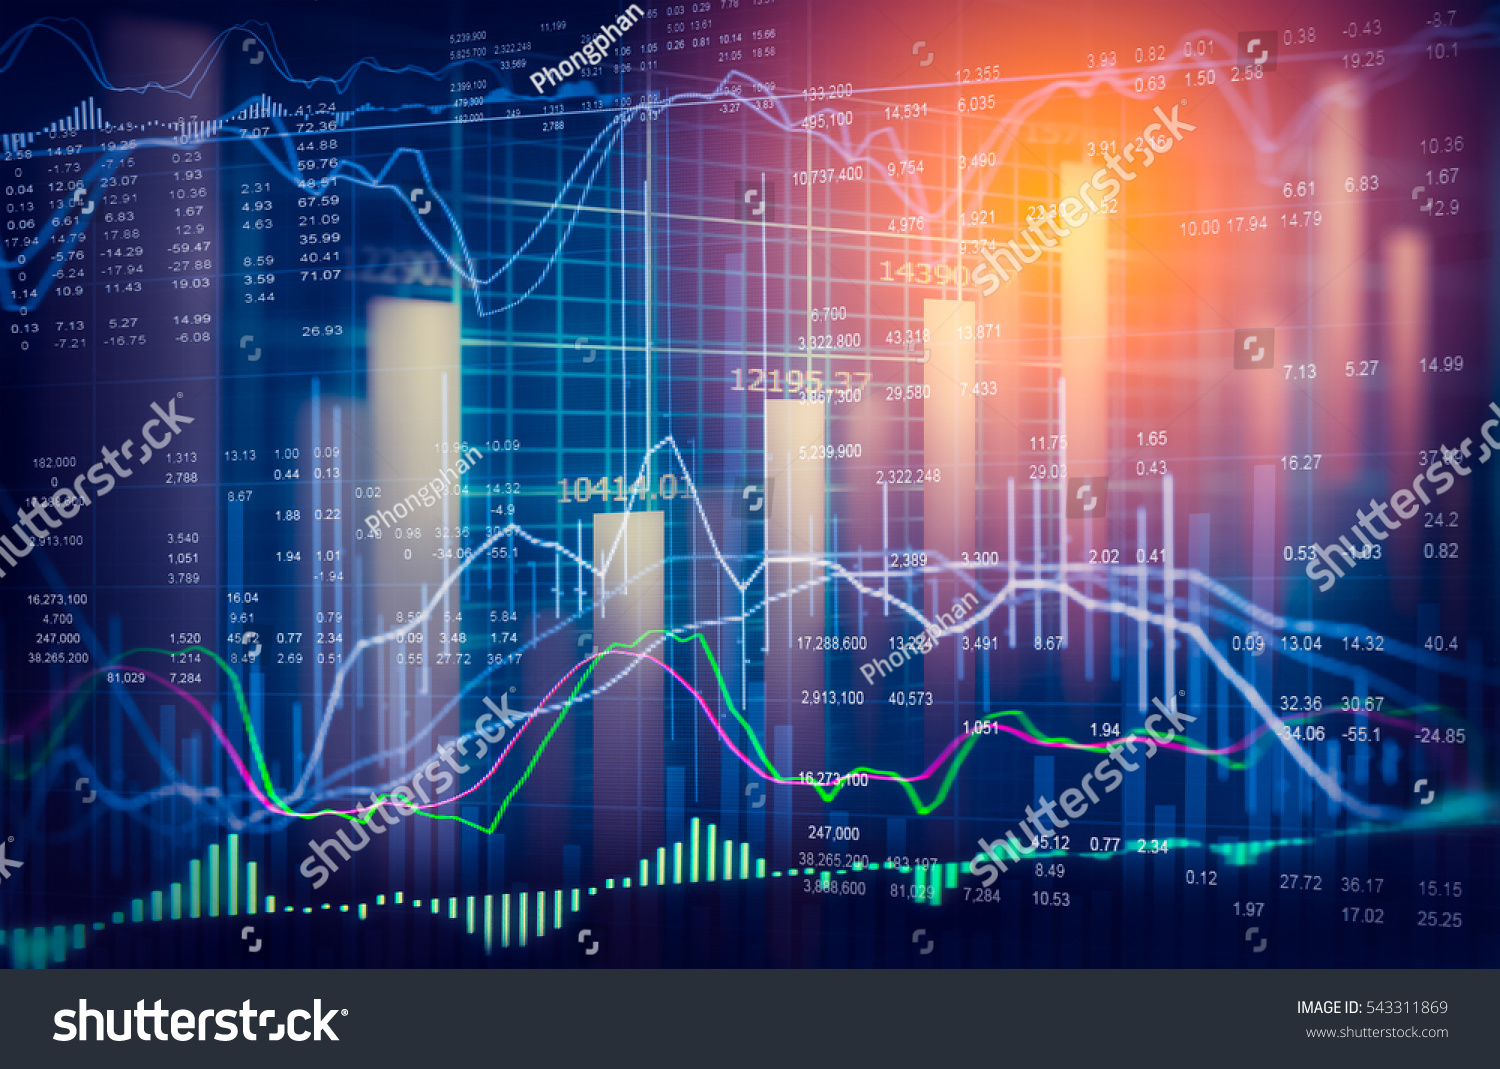 Stock market or forex trading graph and candlestick chart suitable for financial investment concept. Economy trends background for business idea and all art work design. Abstract finance background. #543311869